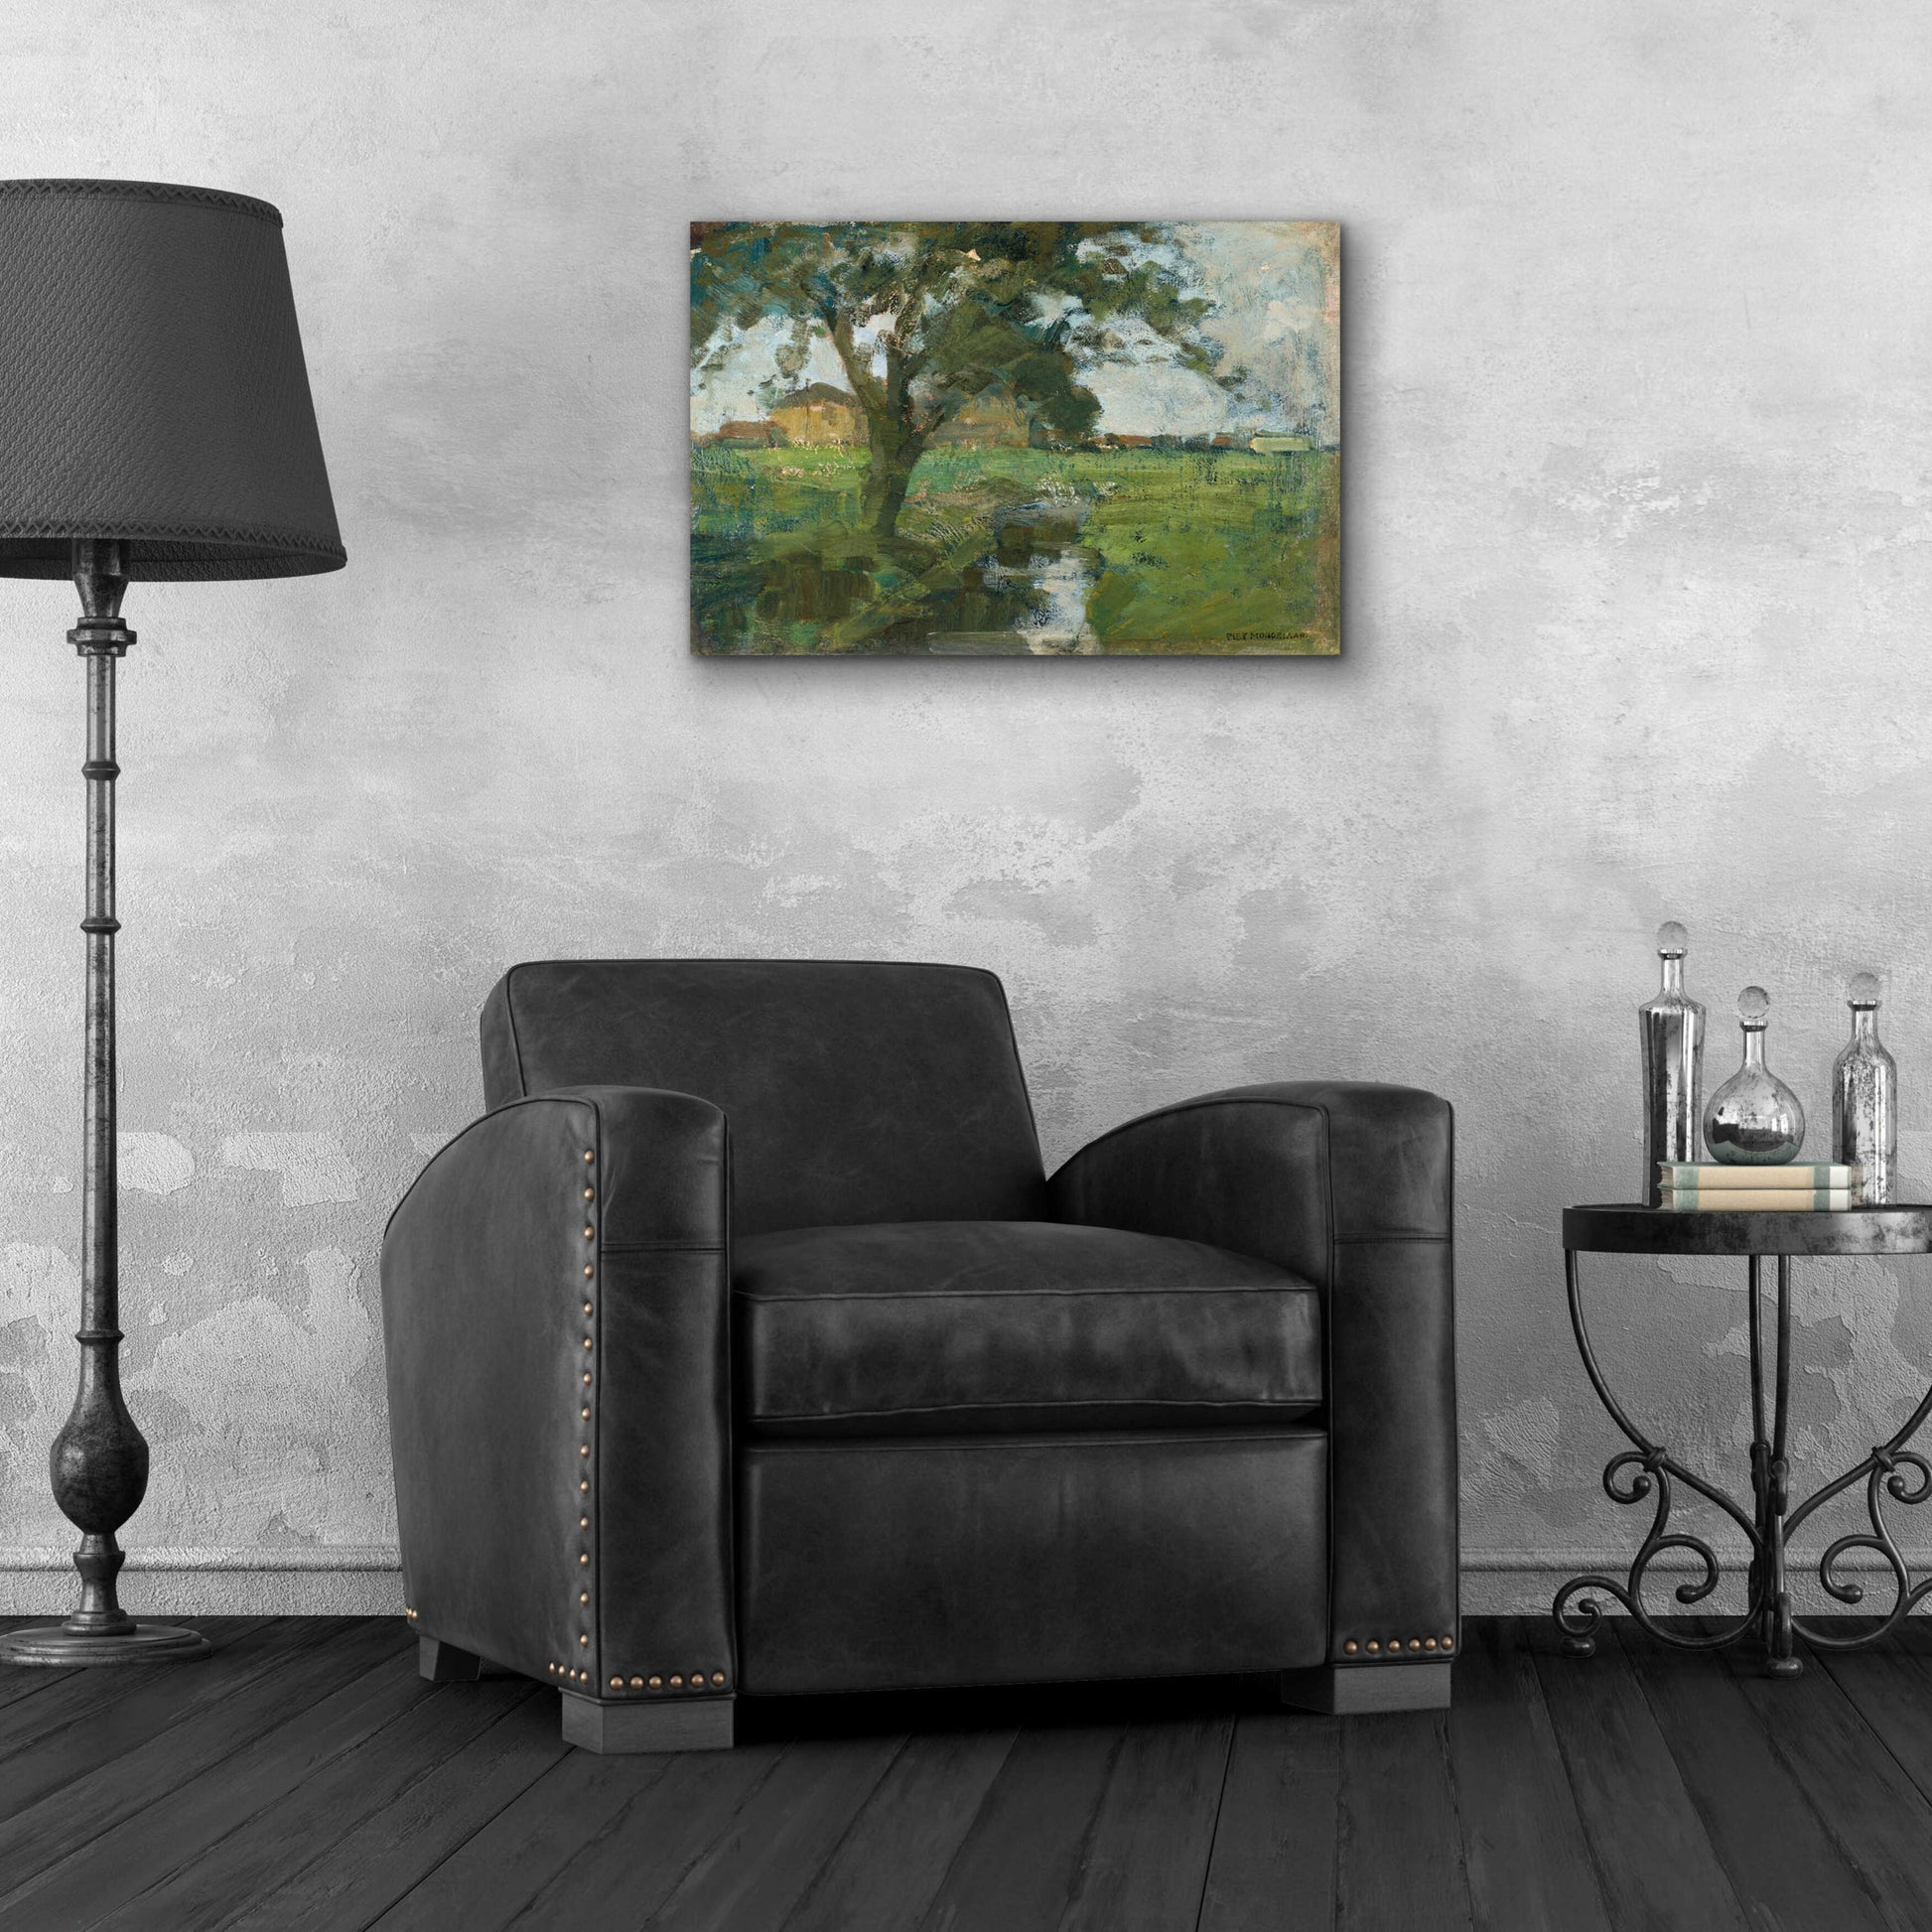 Epic Art 'Farm Settin with Foreground tree and Irrigation Ditch, 1900' by Piet Mondrian, Acrylic Glass Wall Art,24x16